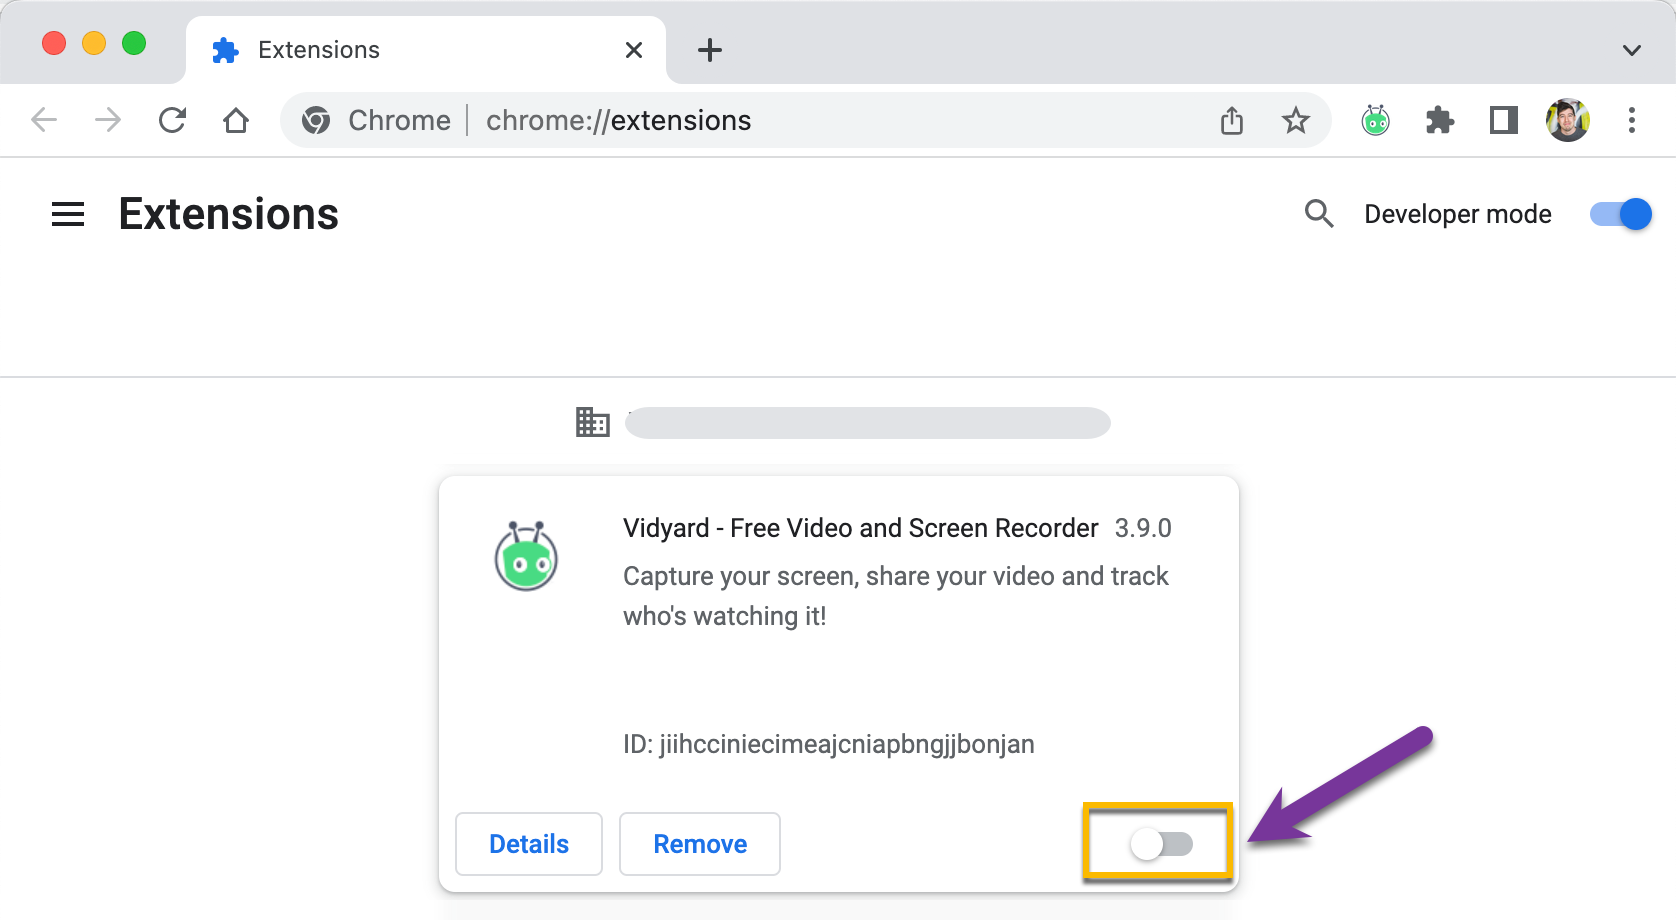 Turning on the toggle next to Vidyard in your Chrome settings to enable the extension